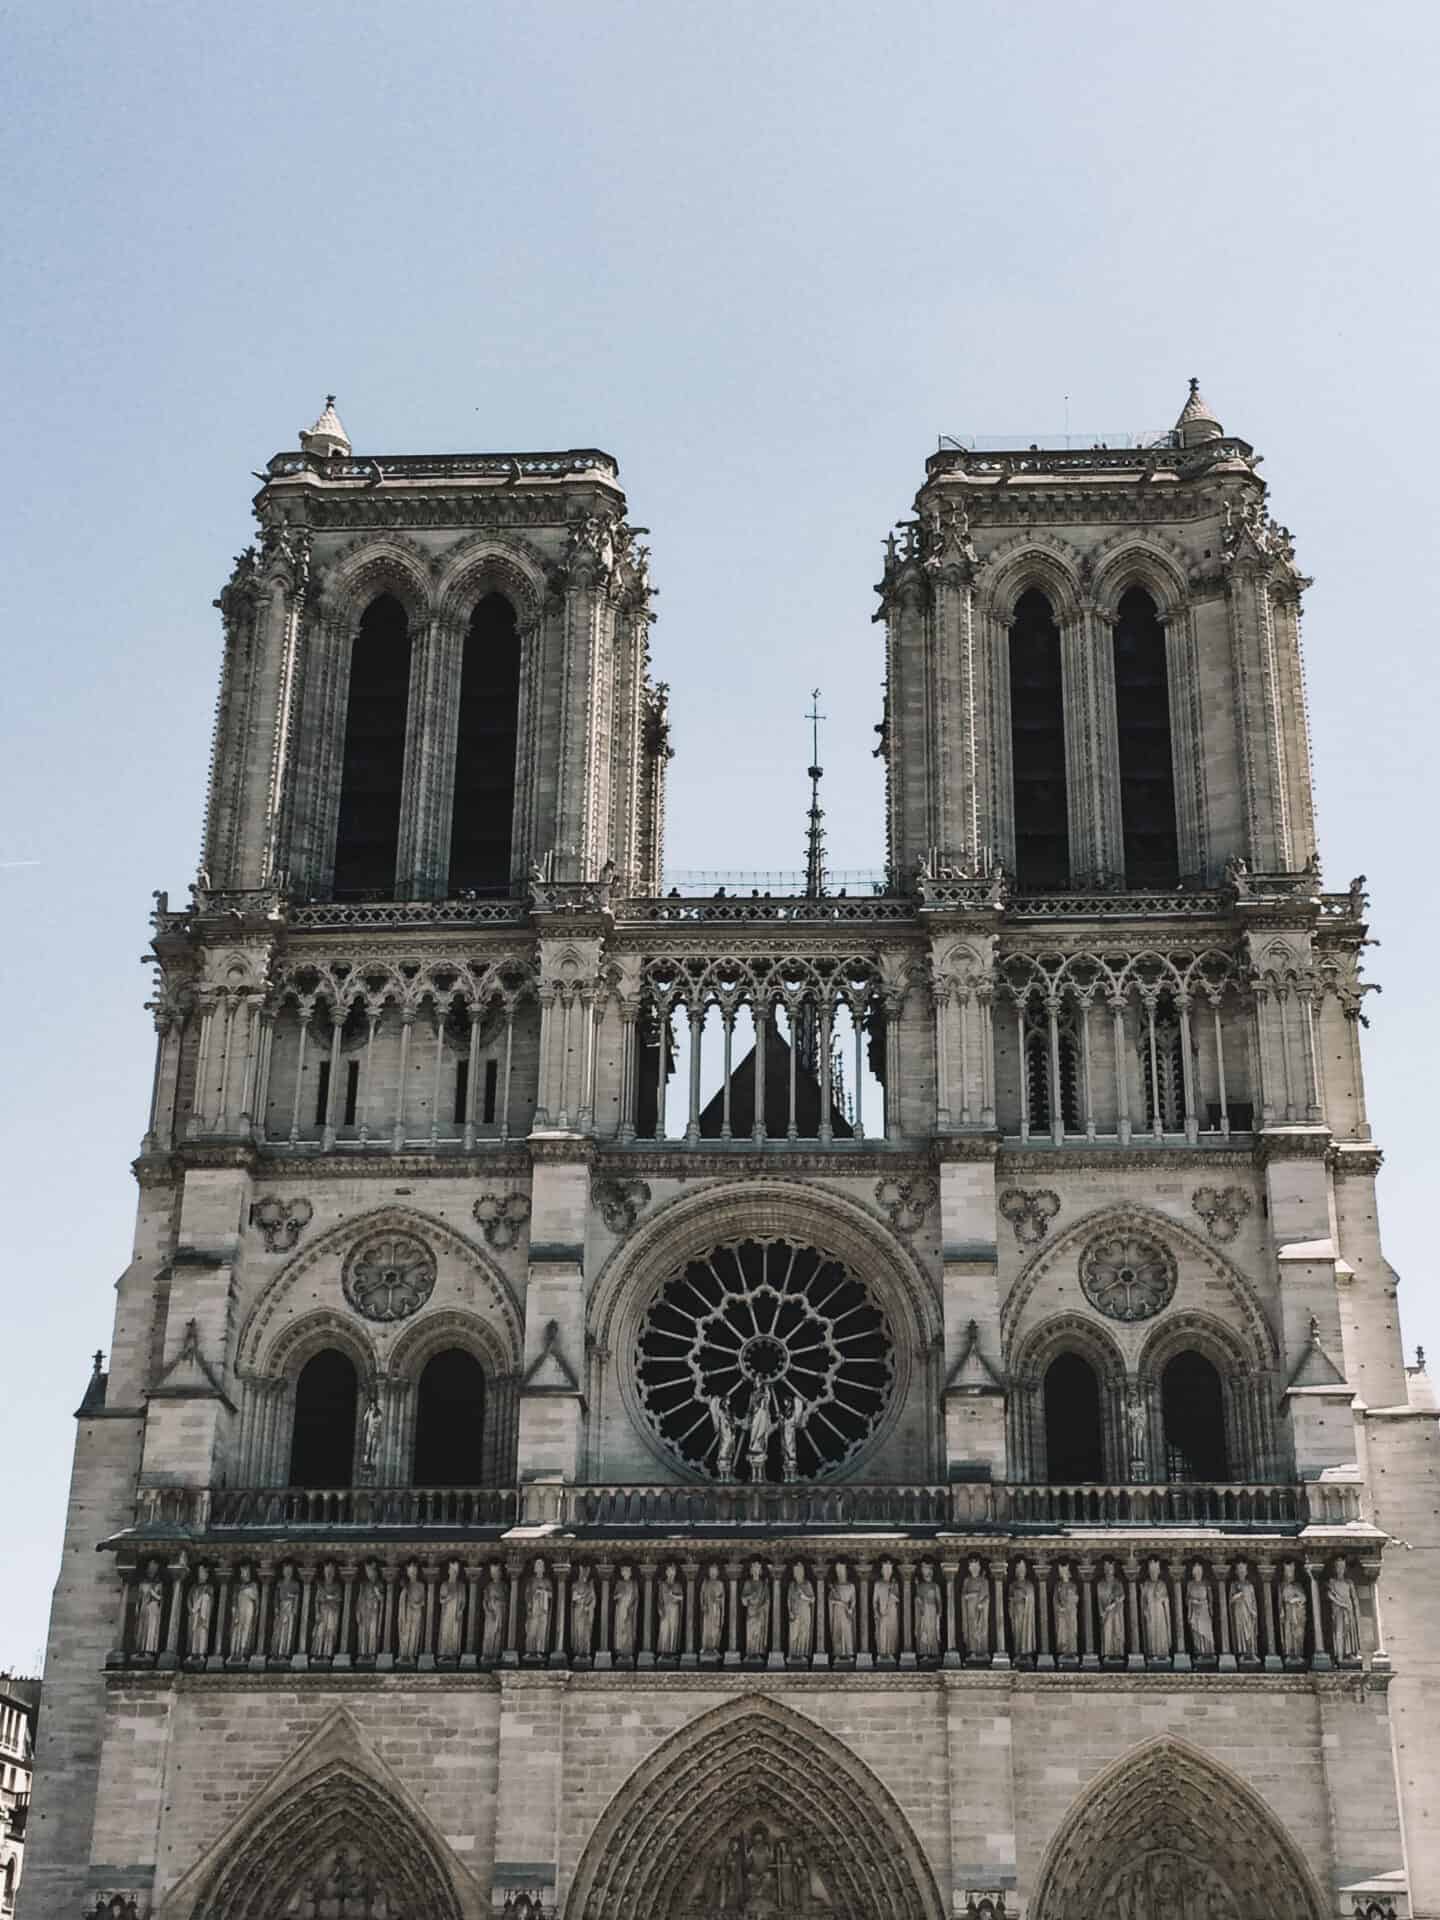 Notre Dame cathedral in Paris before the fire